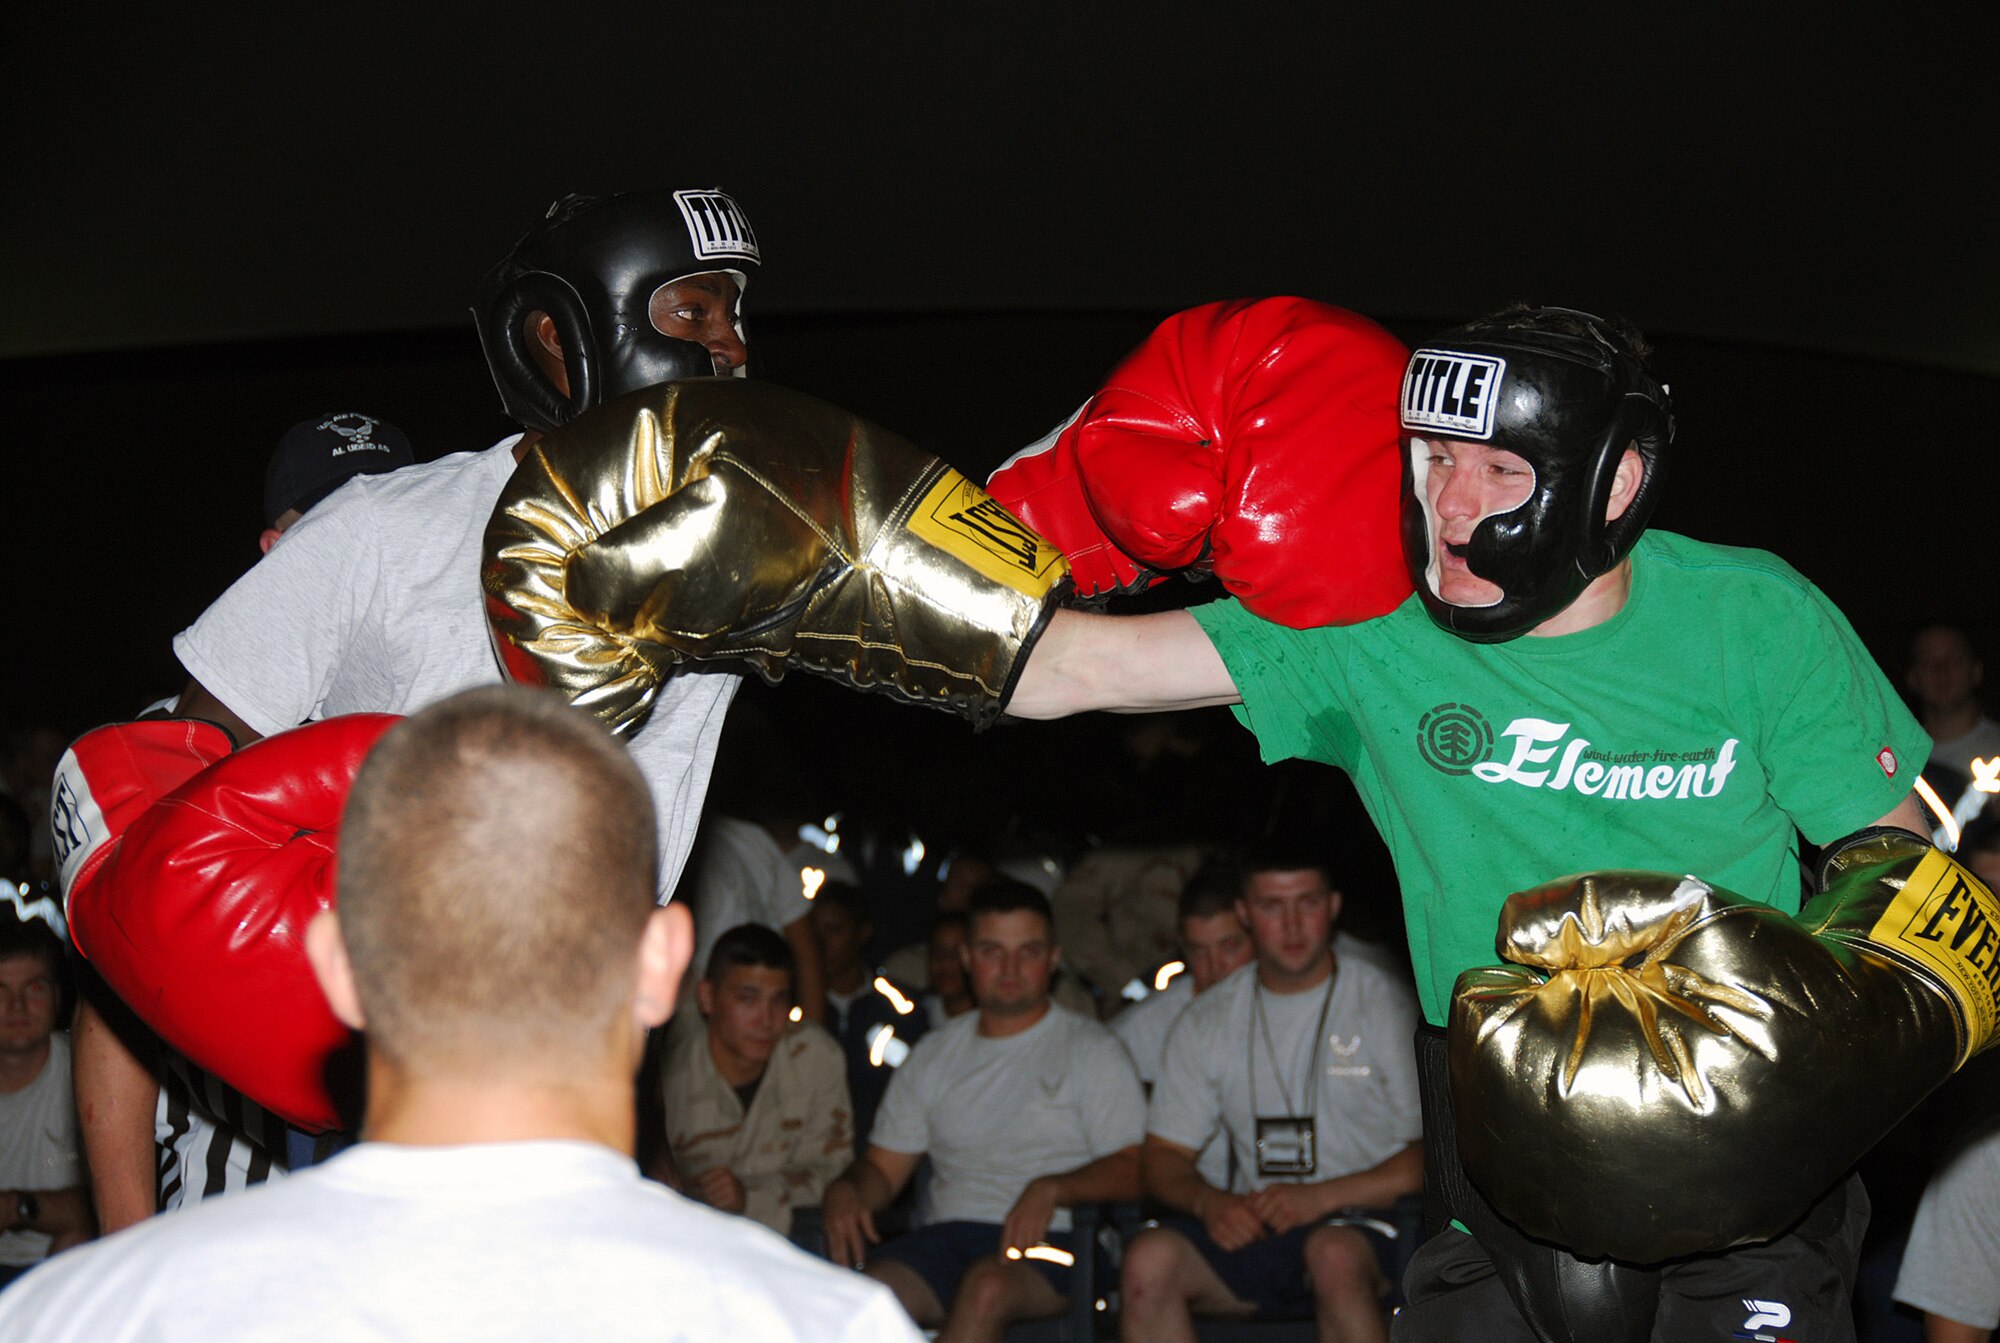 SOUTHWEST ASIA - Staff Sgt. Reginald Johnson, 379th Expeditionary Maintenance Squadron, and Gareth Nutley, Royal Air Force, exchange blows in a boxing match hosted by the , Desert 5 at a Southwest Asia air base. The Friday Night Fights boxing event was at Memorial Plaza Dec. 14. (U. S. Air Force photo/Staff Sgt. Douglas Olsen)